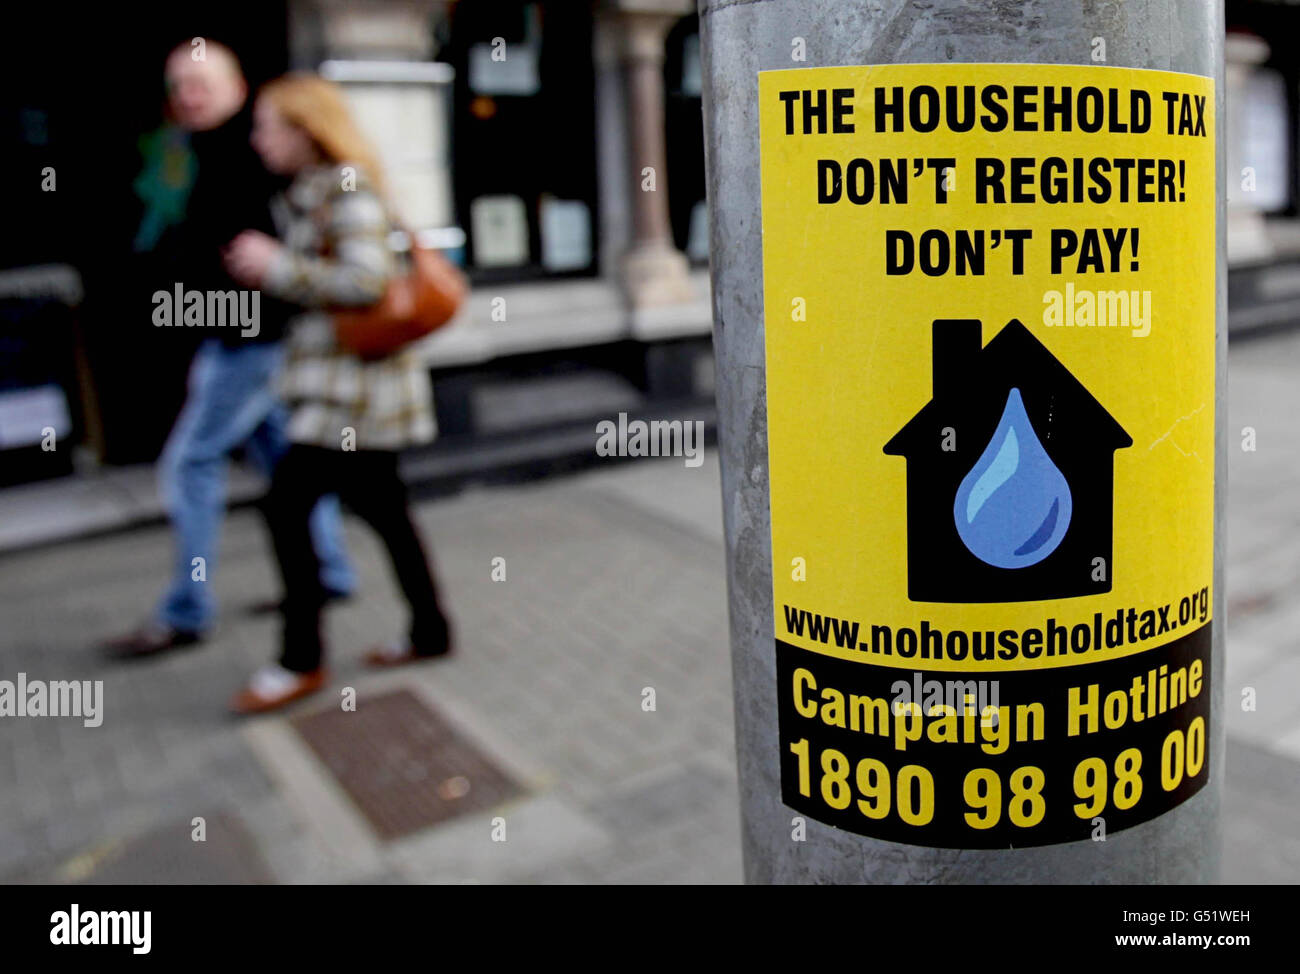 A couple walk past a sticker urging a boycott of the controversial household tax in Dublin. Stock Photo